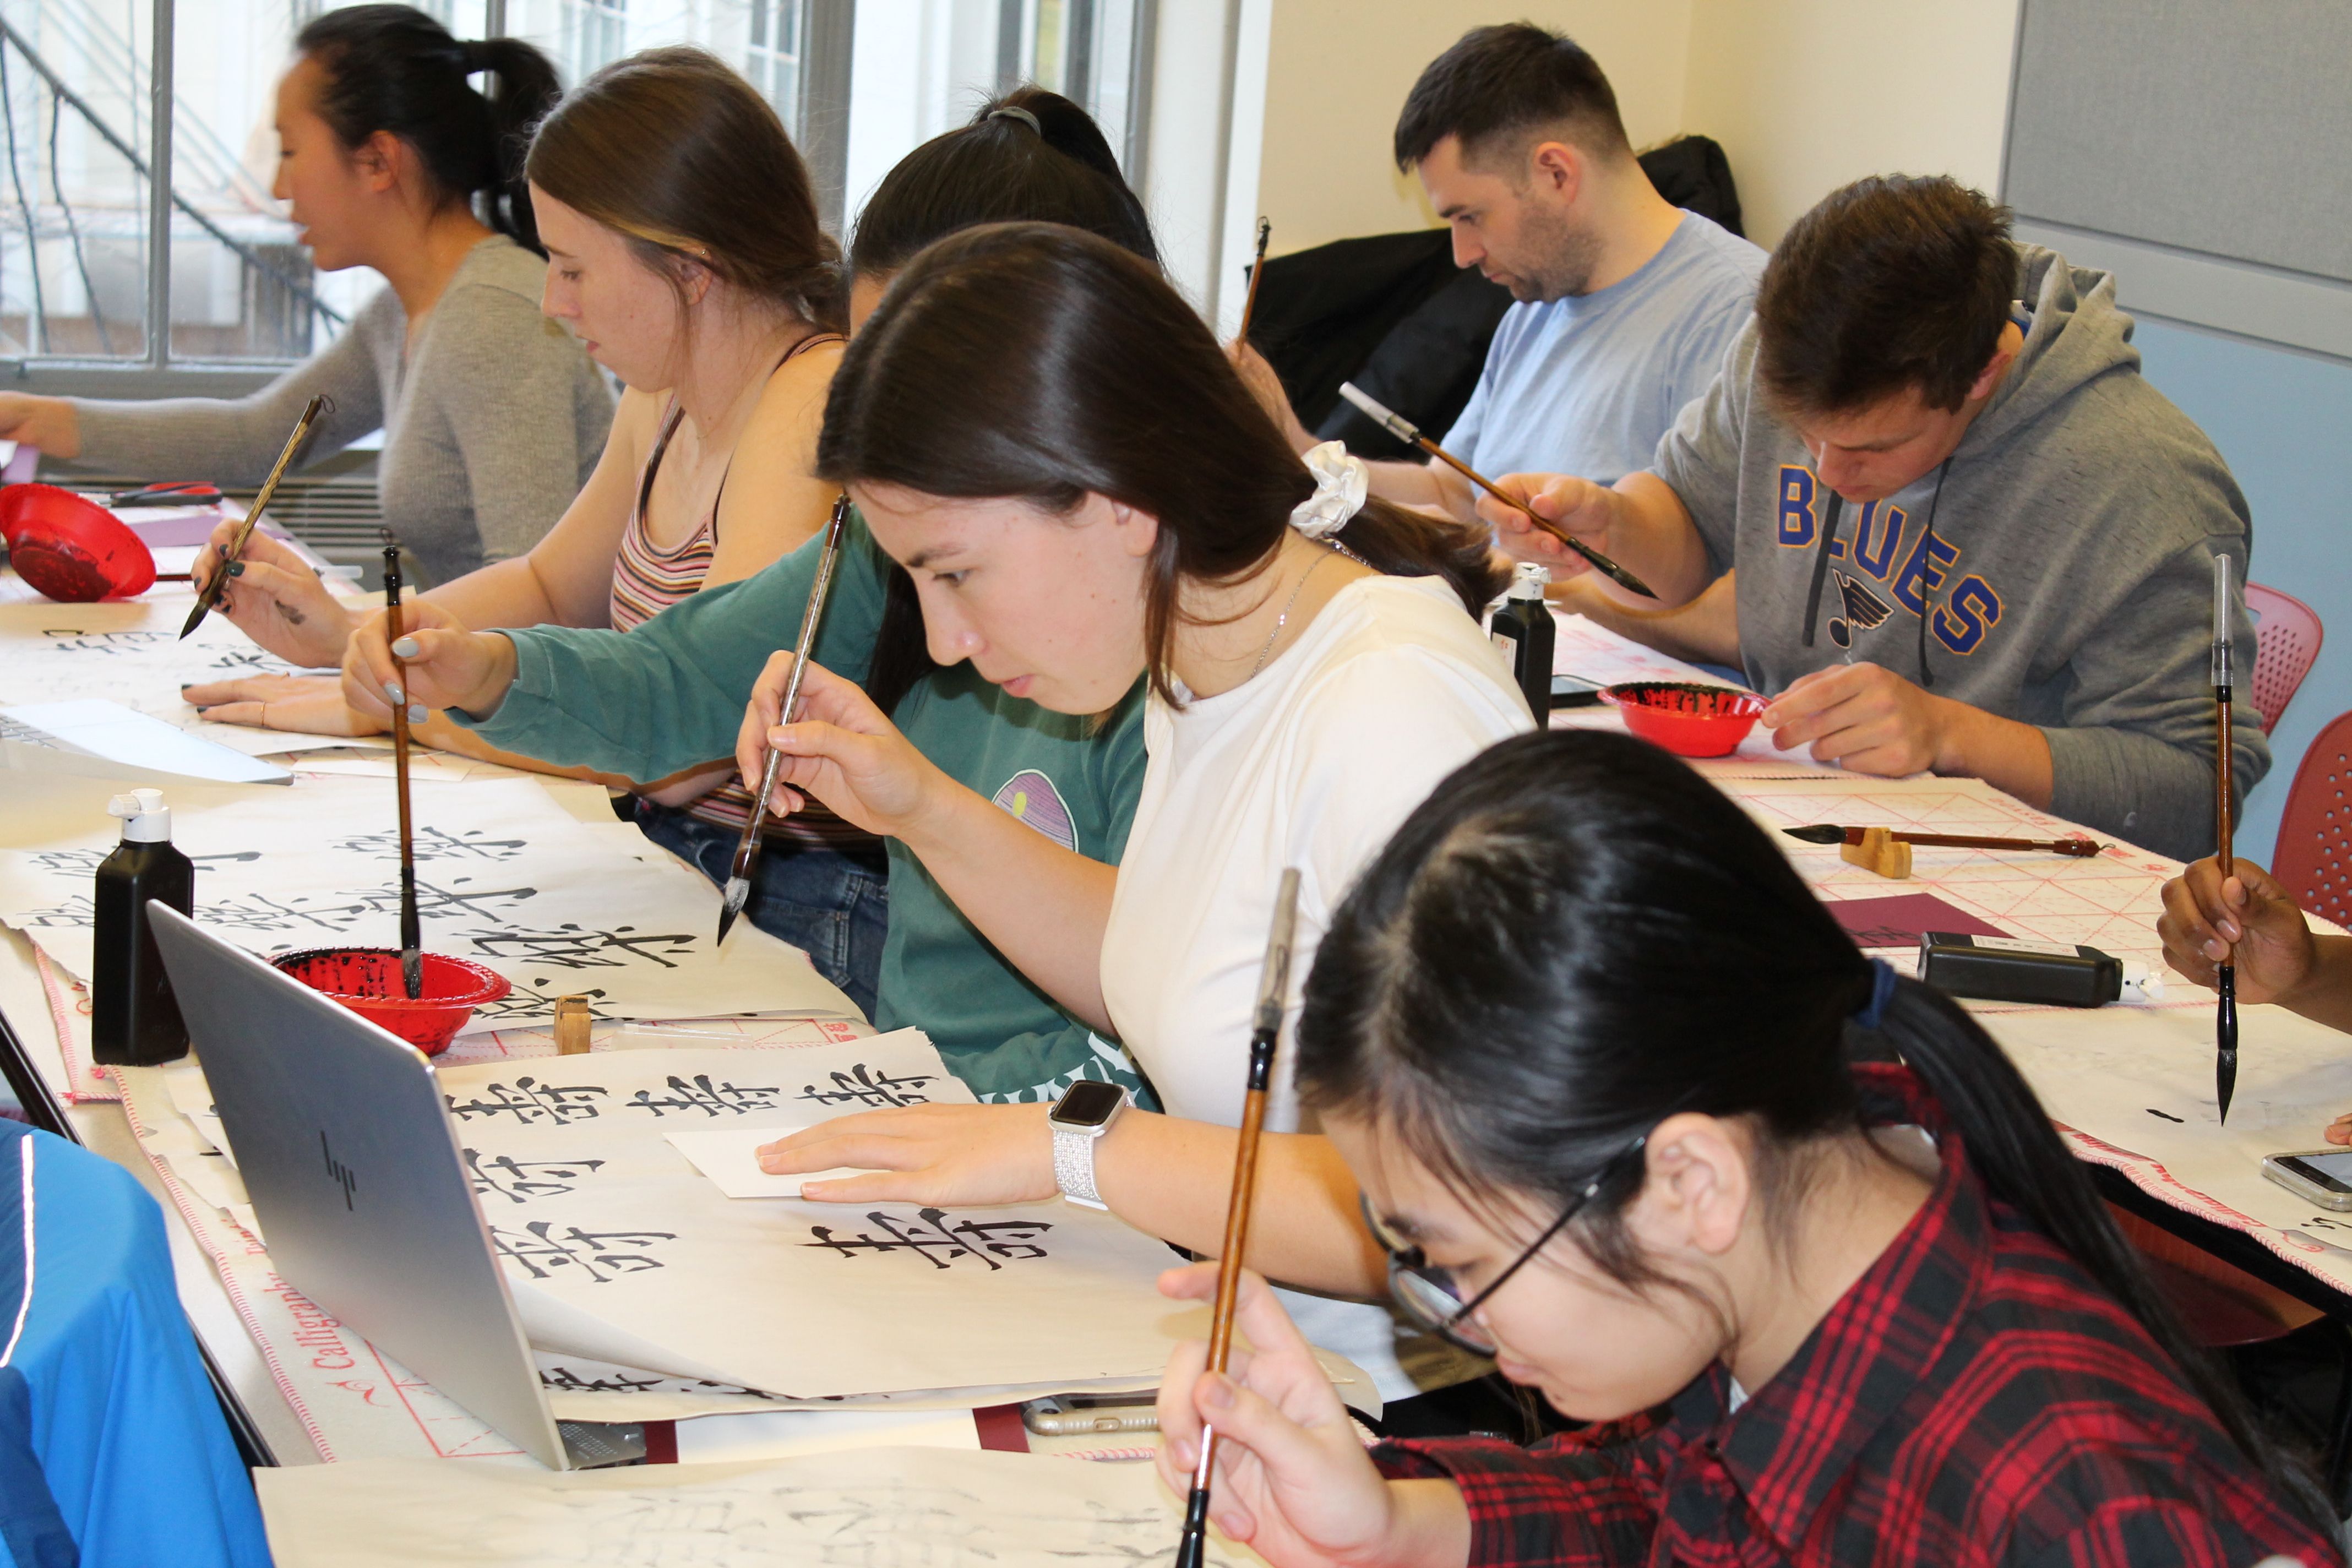 3-questions-kang-zhou-on-the-lessons-of-chinese-calligraphy-mit-news-massachusetts